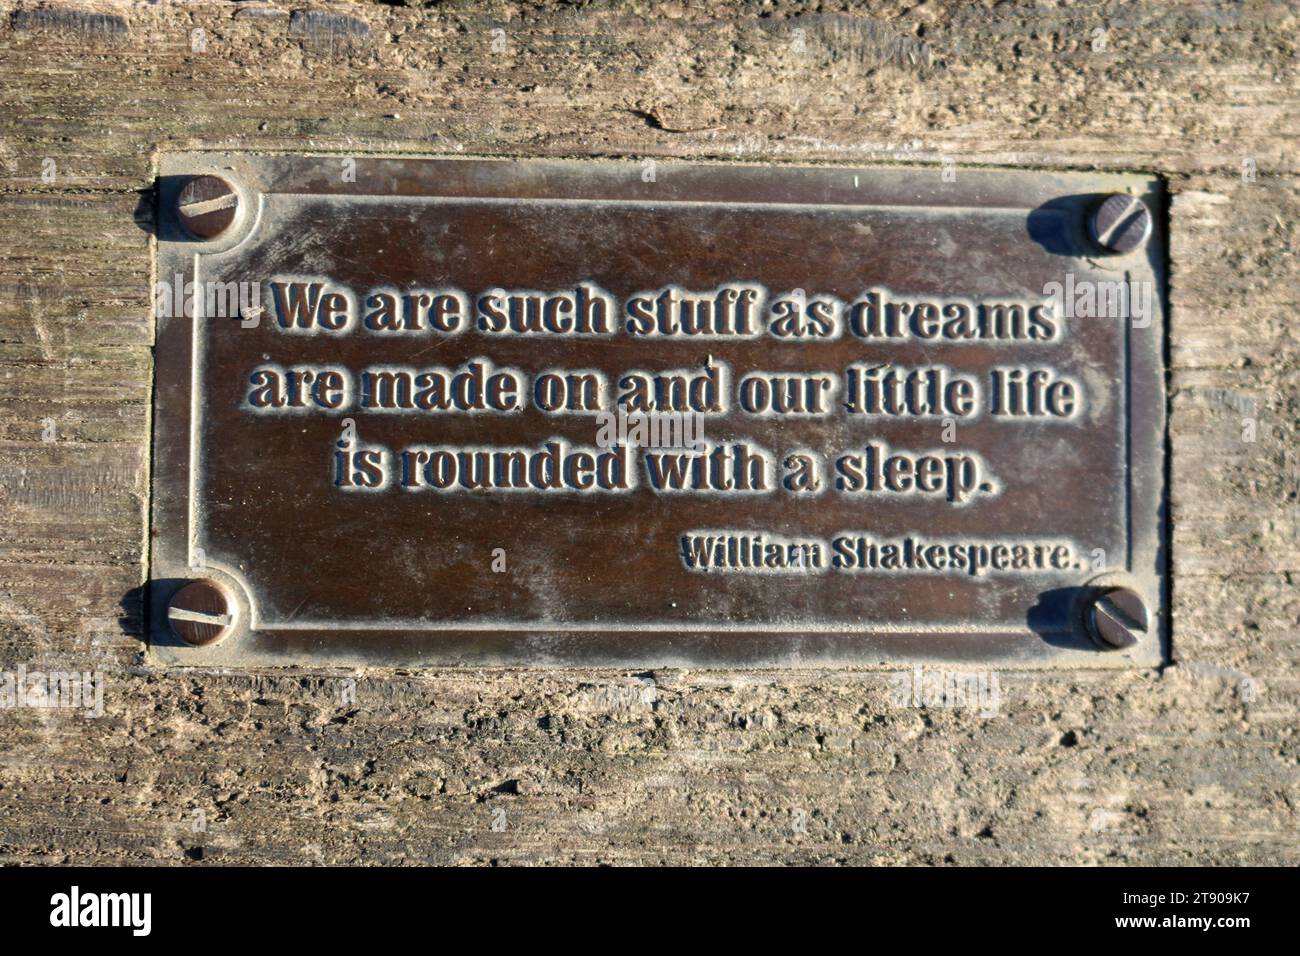 Shakespearian quote on plaque on a seat on Arnside Knott, Cumbria. We are such stuff as dreams are made on and our little life is rounded with a sleep. Stock Photo